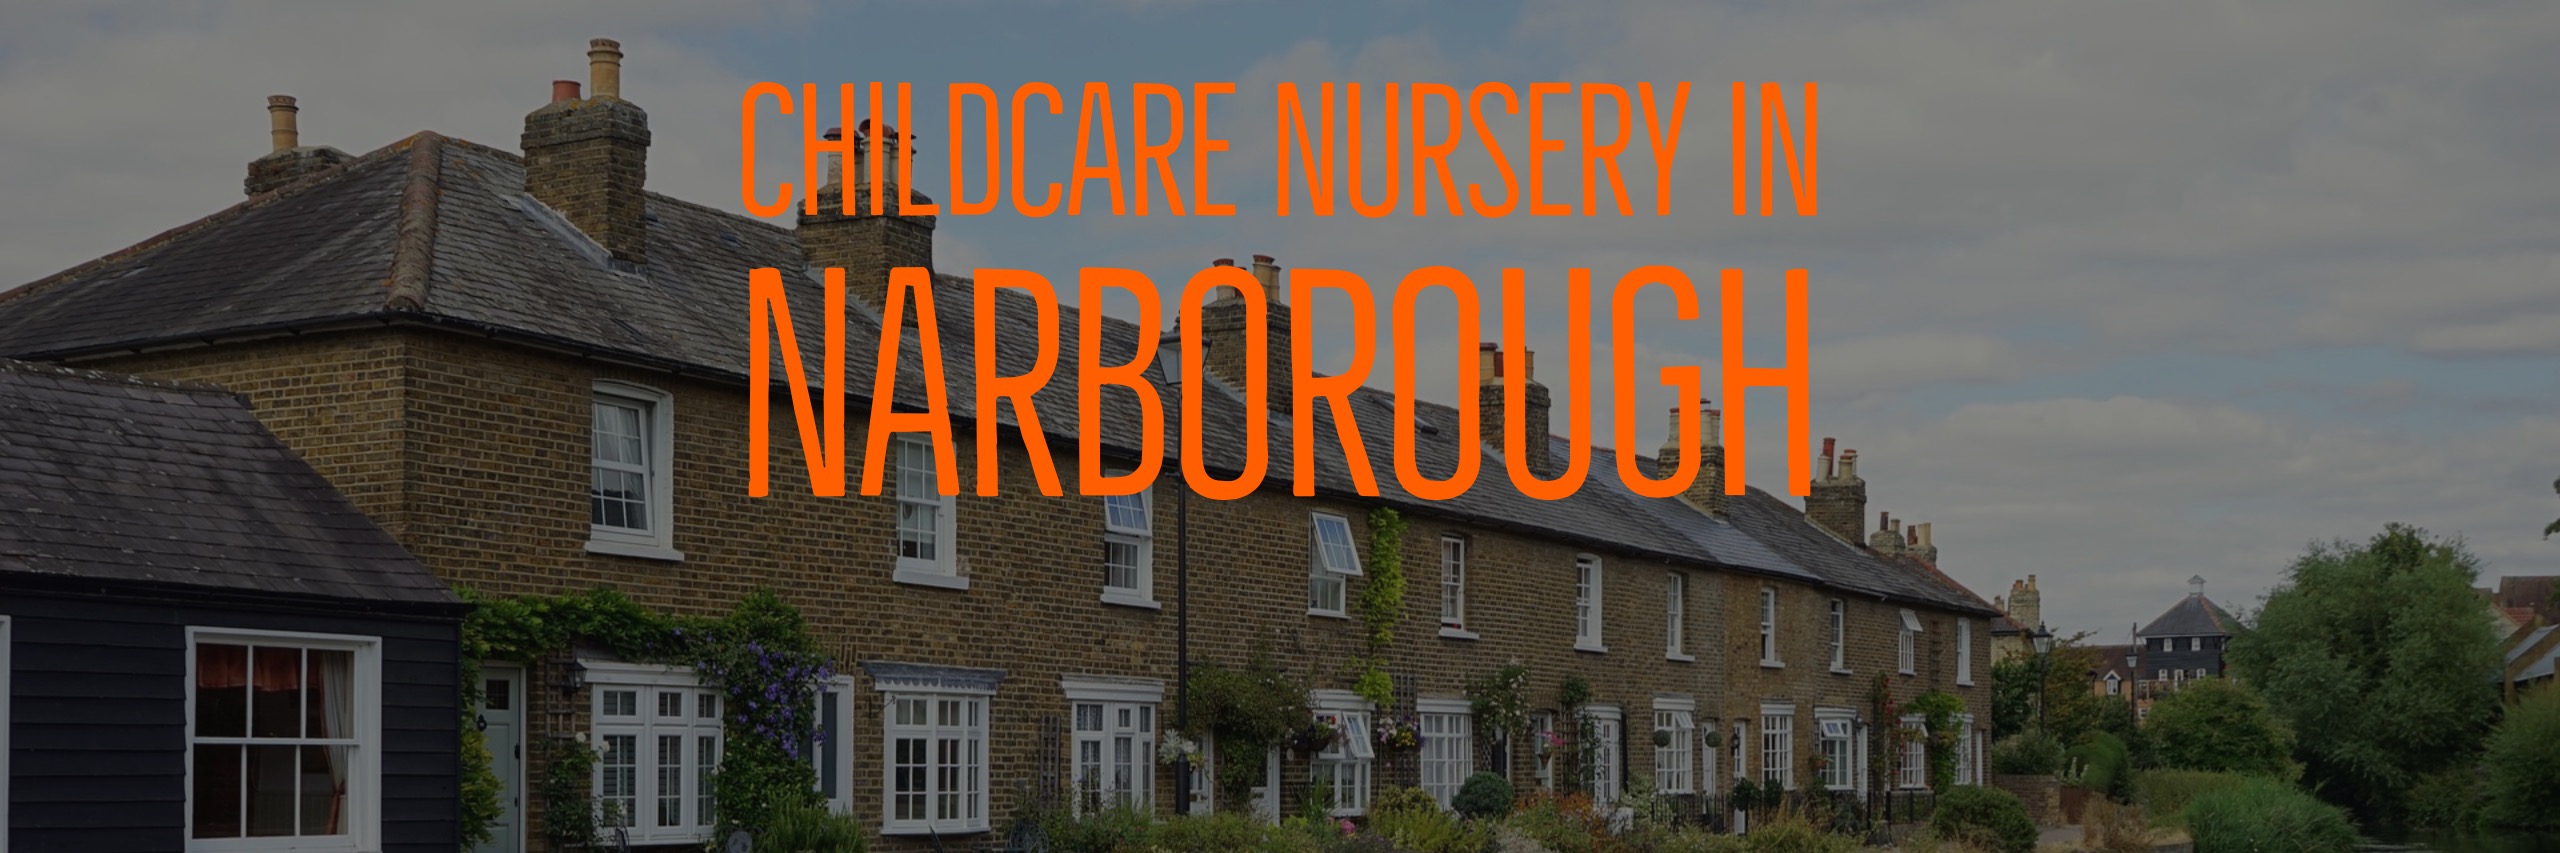 day nursery Narborough & childcare nursery in littlethorpe Leicester